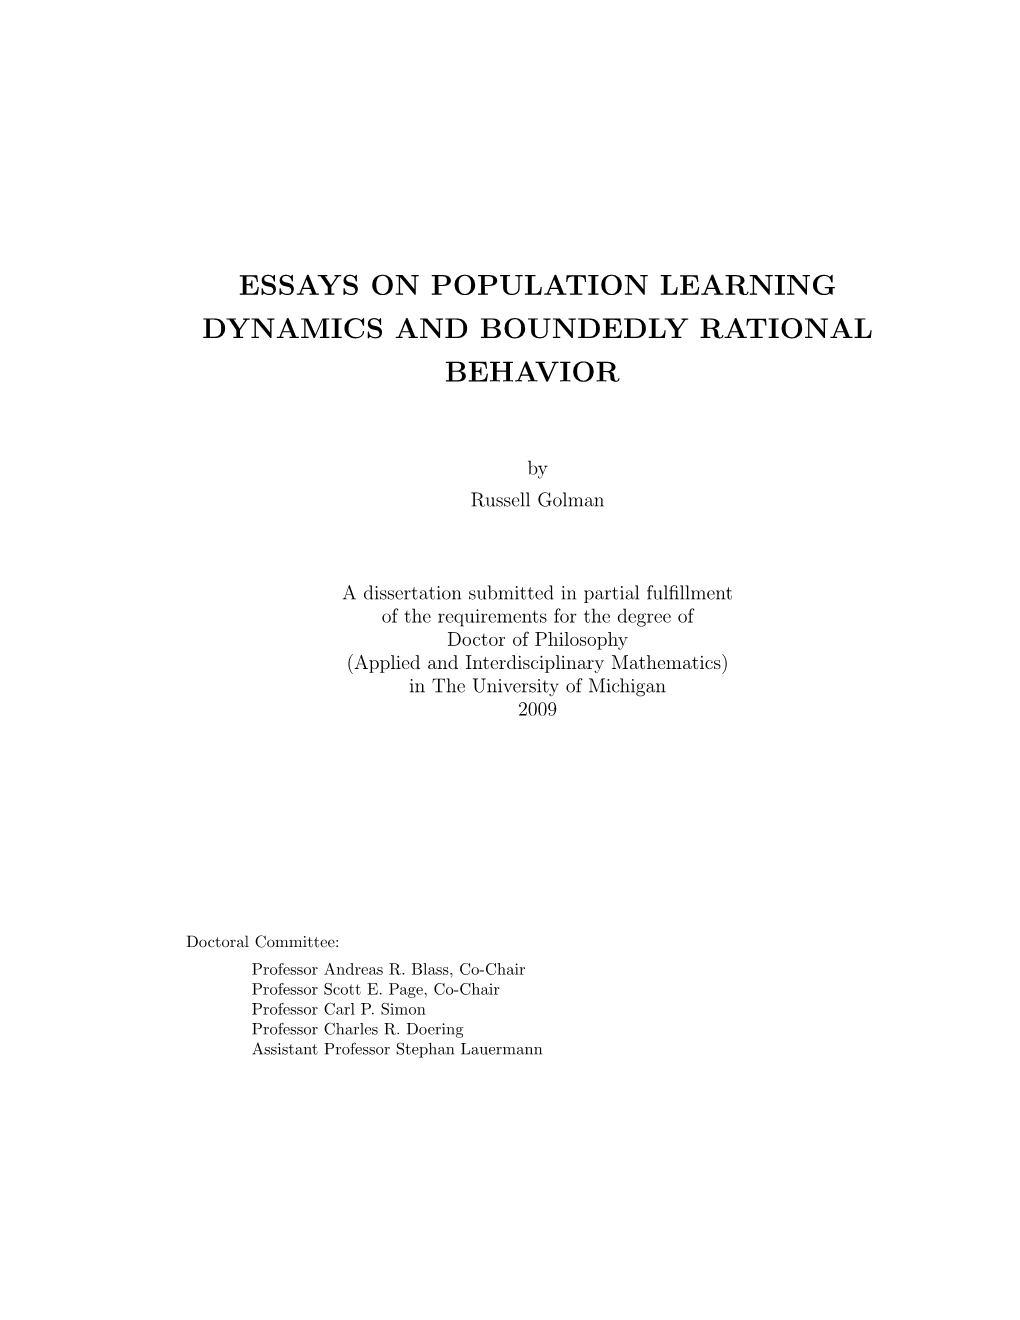 Essays on Population Learning Dynamics and Boundedly Rational Behavior